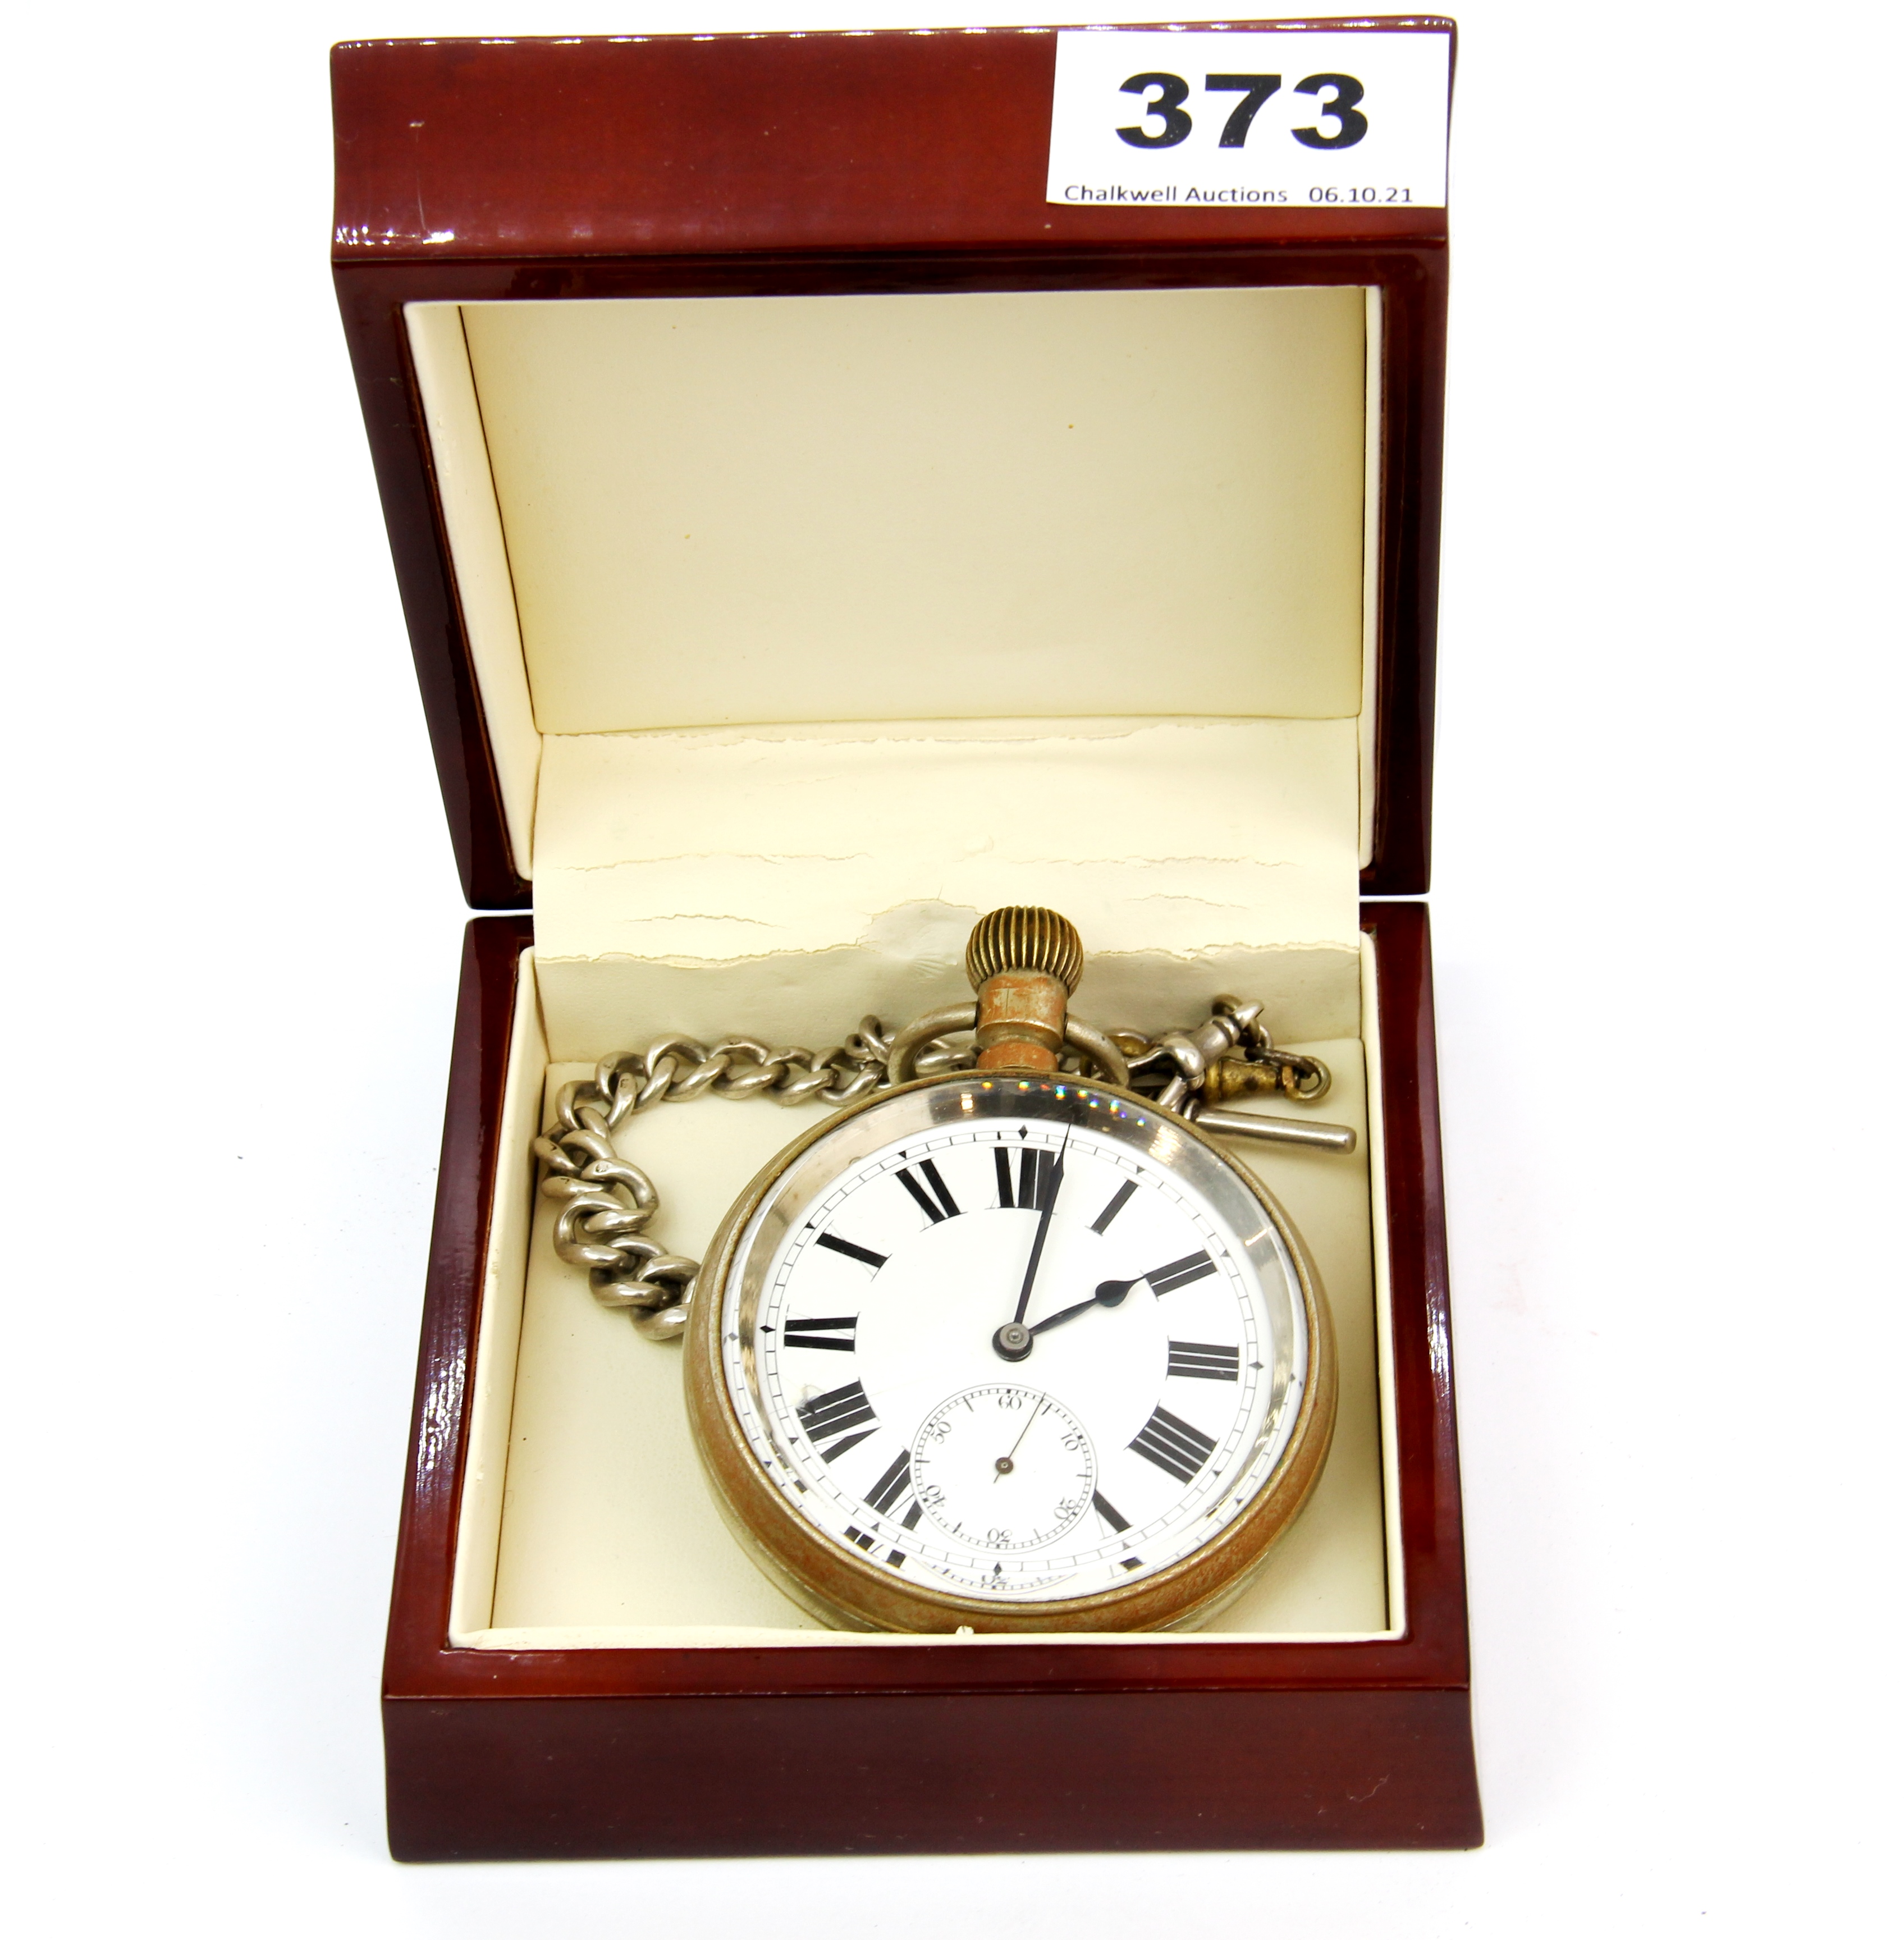 A Goliath pocket watch with a hallmarked silver chain, understood to be in working order.